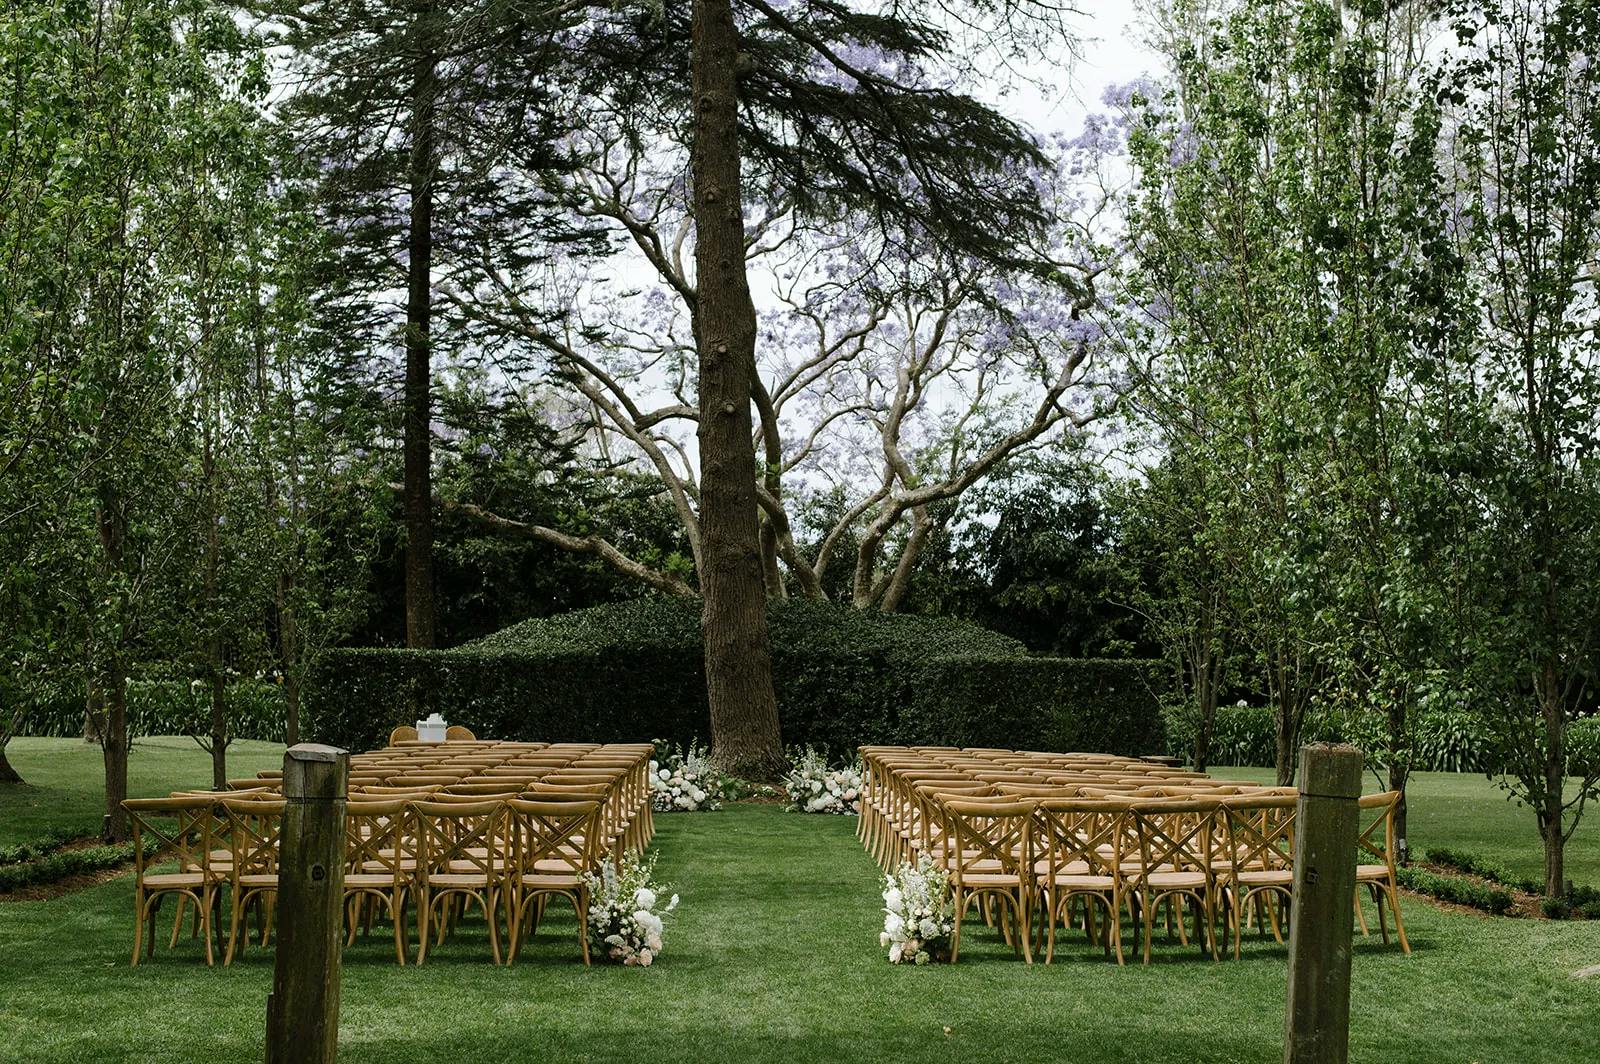 A picturesque outdoor wedding ceremony setup with rows of wooden chairs lined on a grassy aisle, leading to a large, elegant tree at the front. The scene is surrounded by lush greenery and tall trees, creating a serene and natural backdrop.